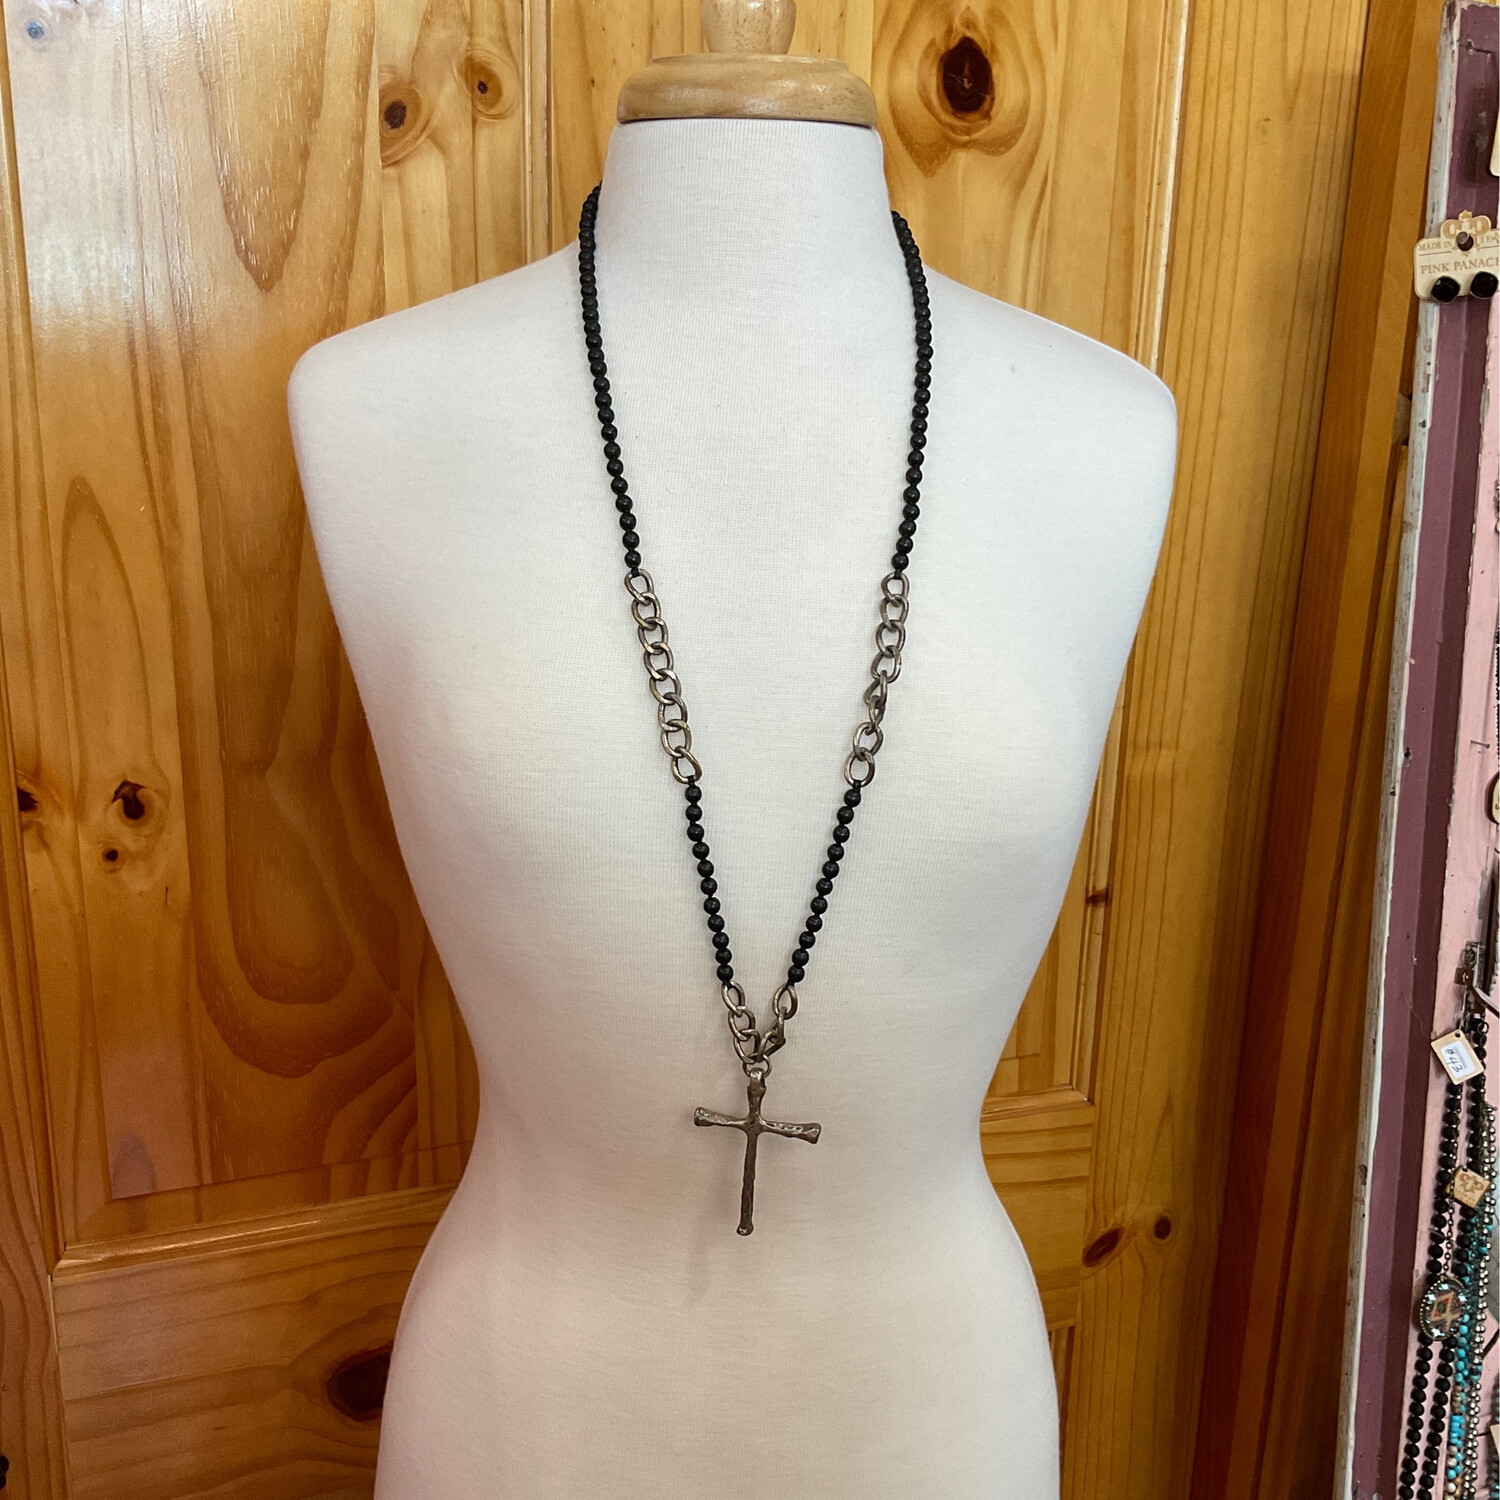 Love Token 21608 Blk Onyx Beads W/SS Chain & Pendant Necklace 